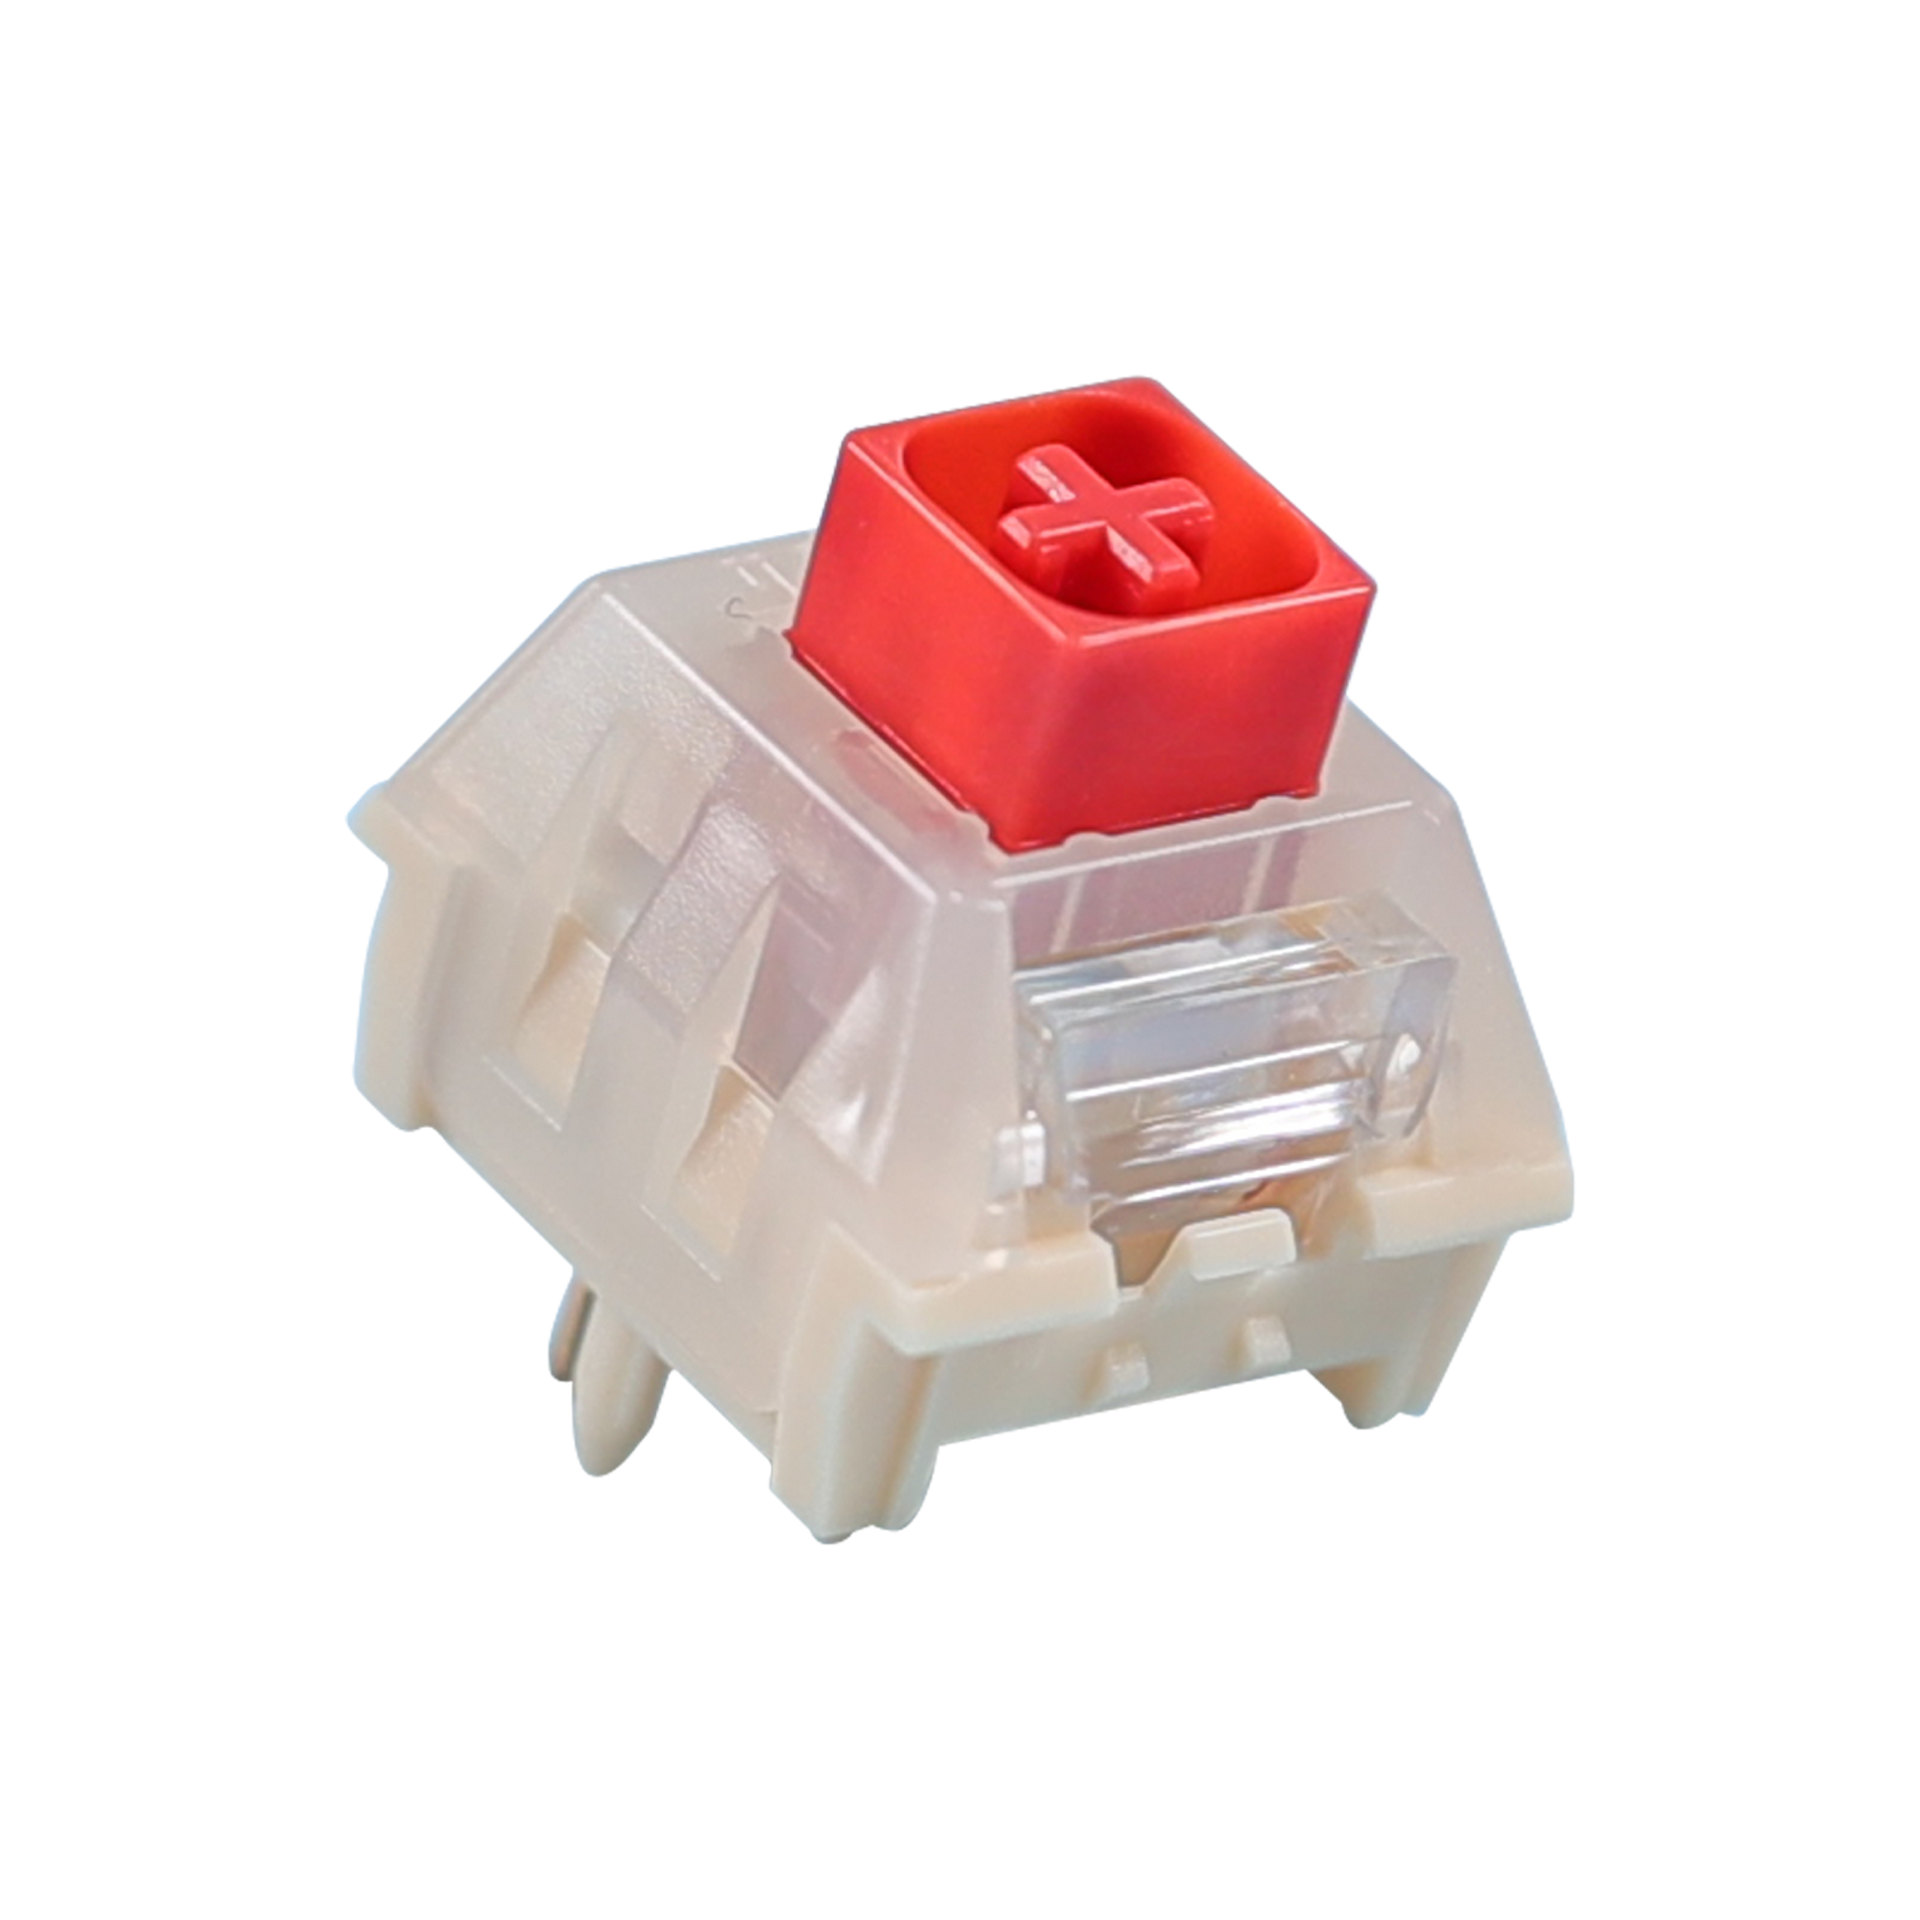 Kailh Red Bean Pudding Linear Box Switch-Chosfox